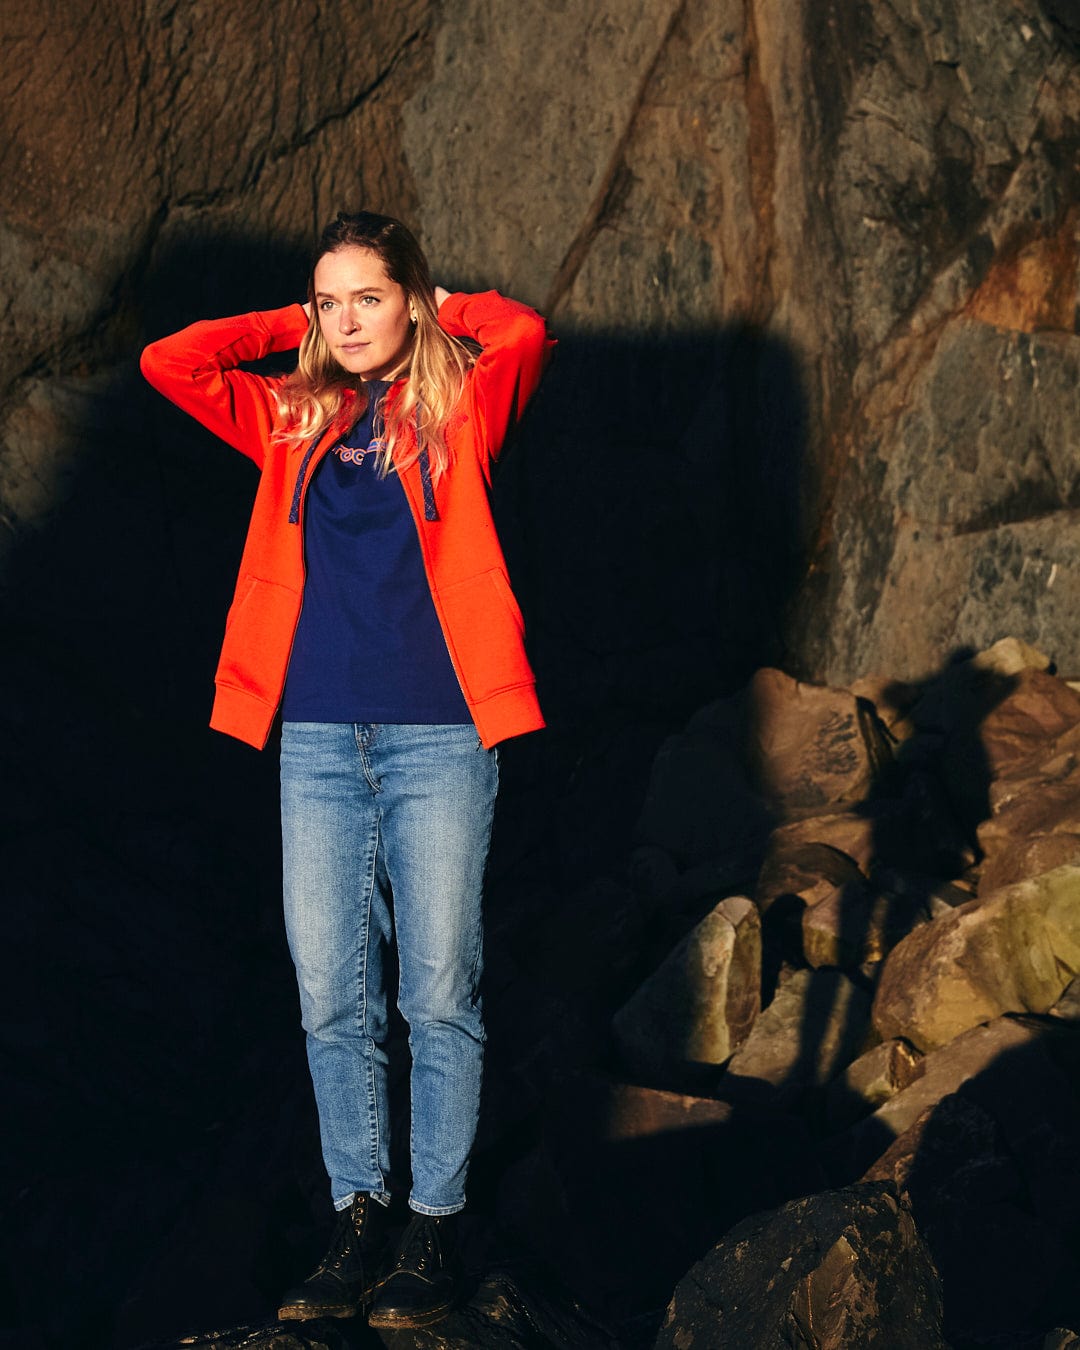 A woman in a Retro Wave Embroidered - Womens Zip Hoodie - Red, featuring subtle Saltrock branding and contrast blue hood lining, standing on rocks.